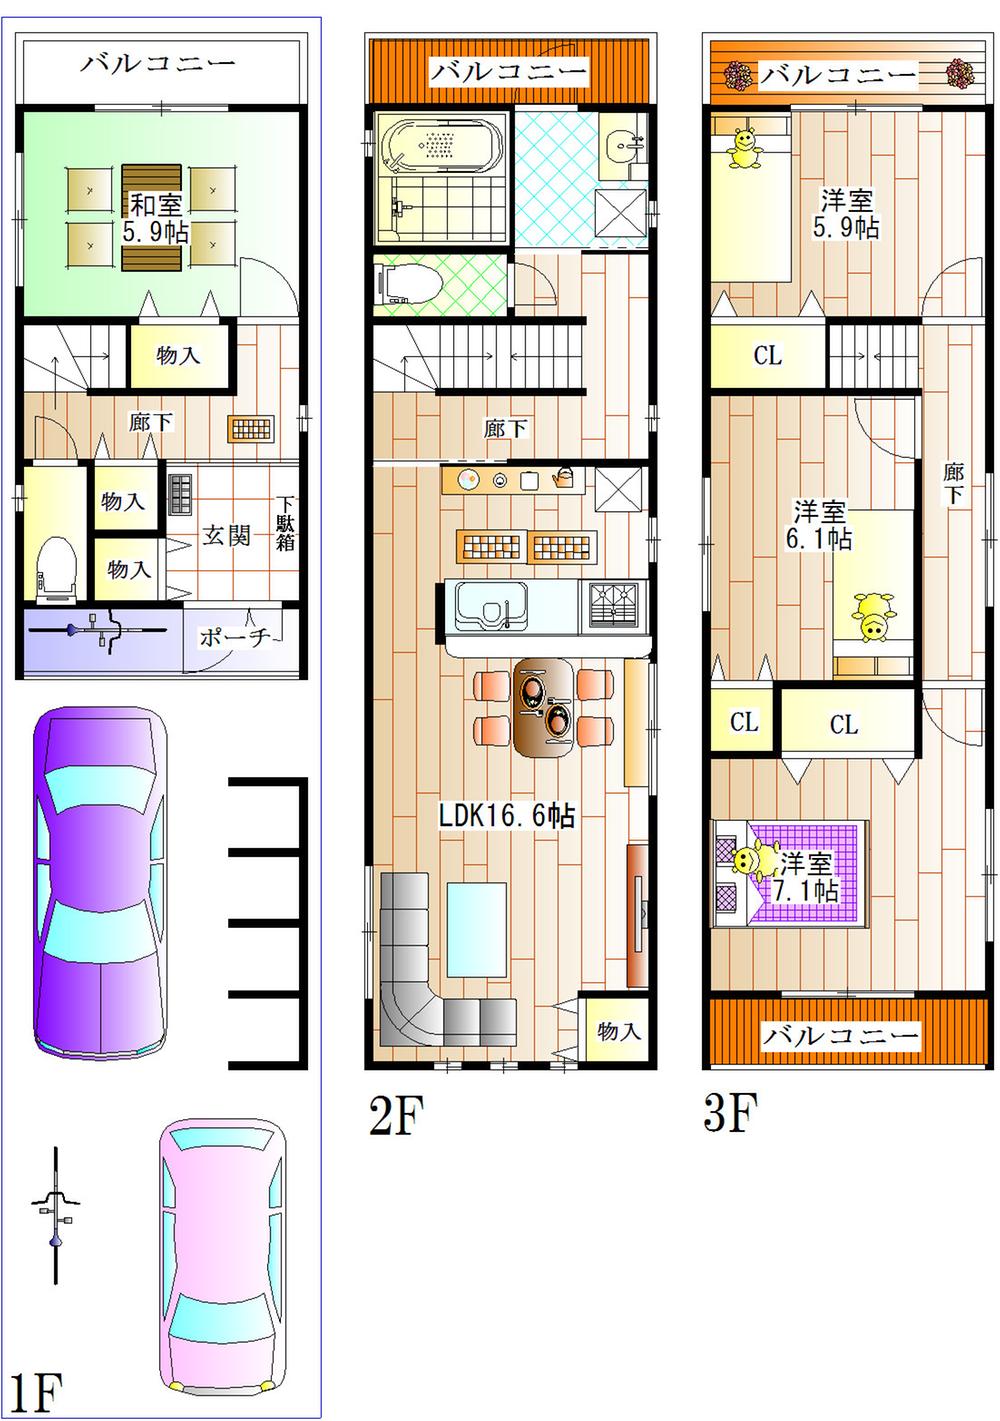 Floor plan. 39,800,000 yen, 4LDK, Land area 79 sq m , Building area 120 sq m floor plan can be changed. There is a thing that floor plan is changed by administrative guidance. Please note.